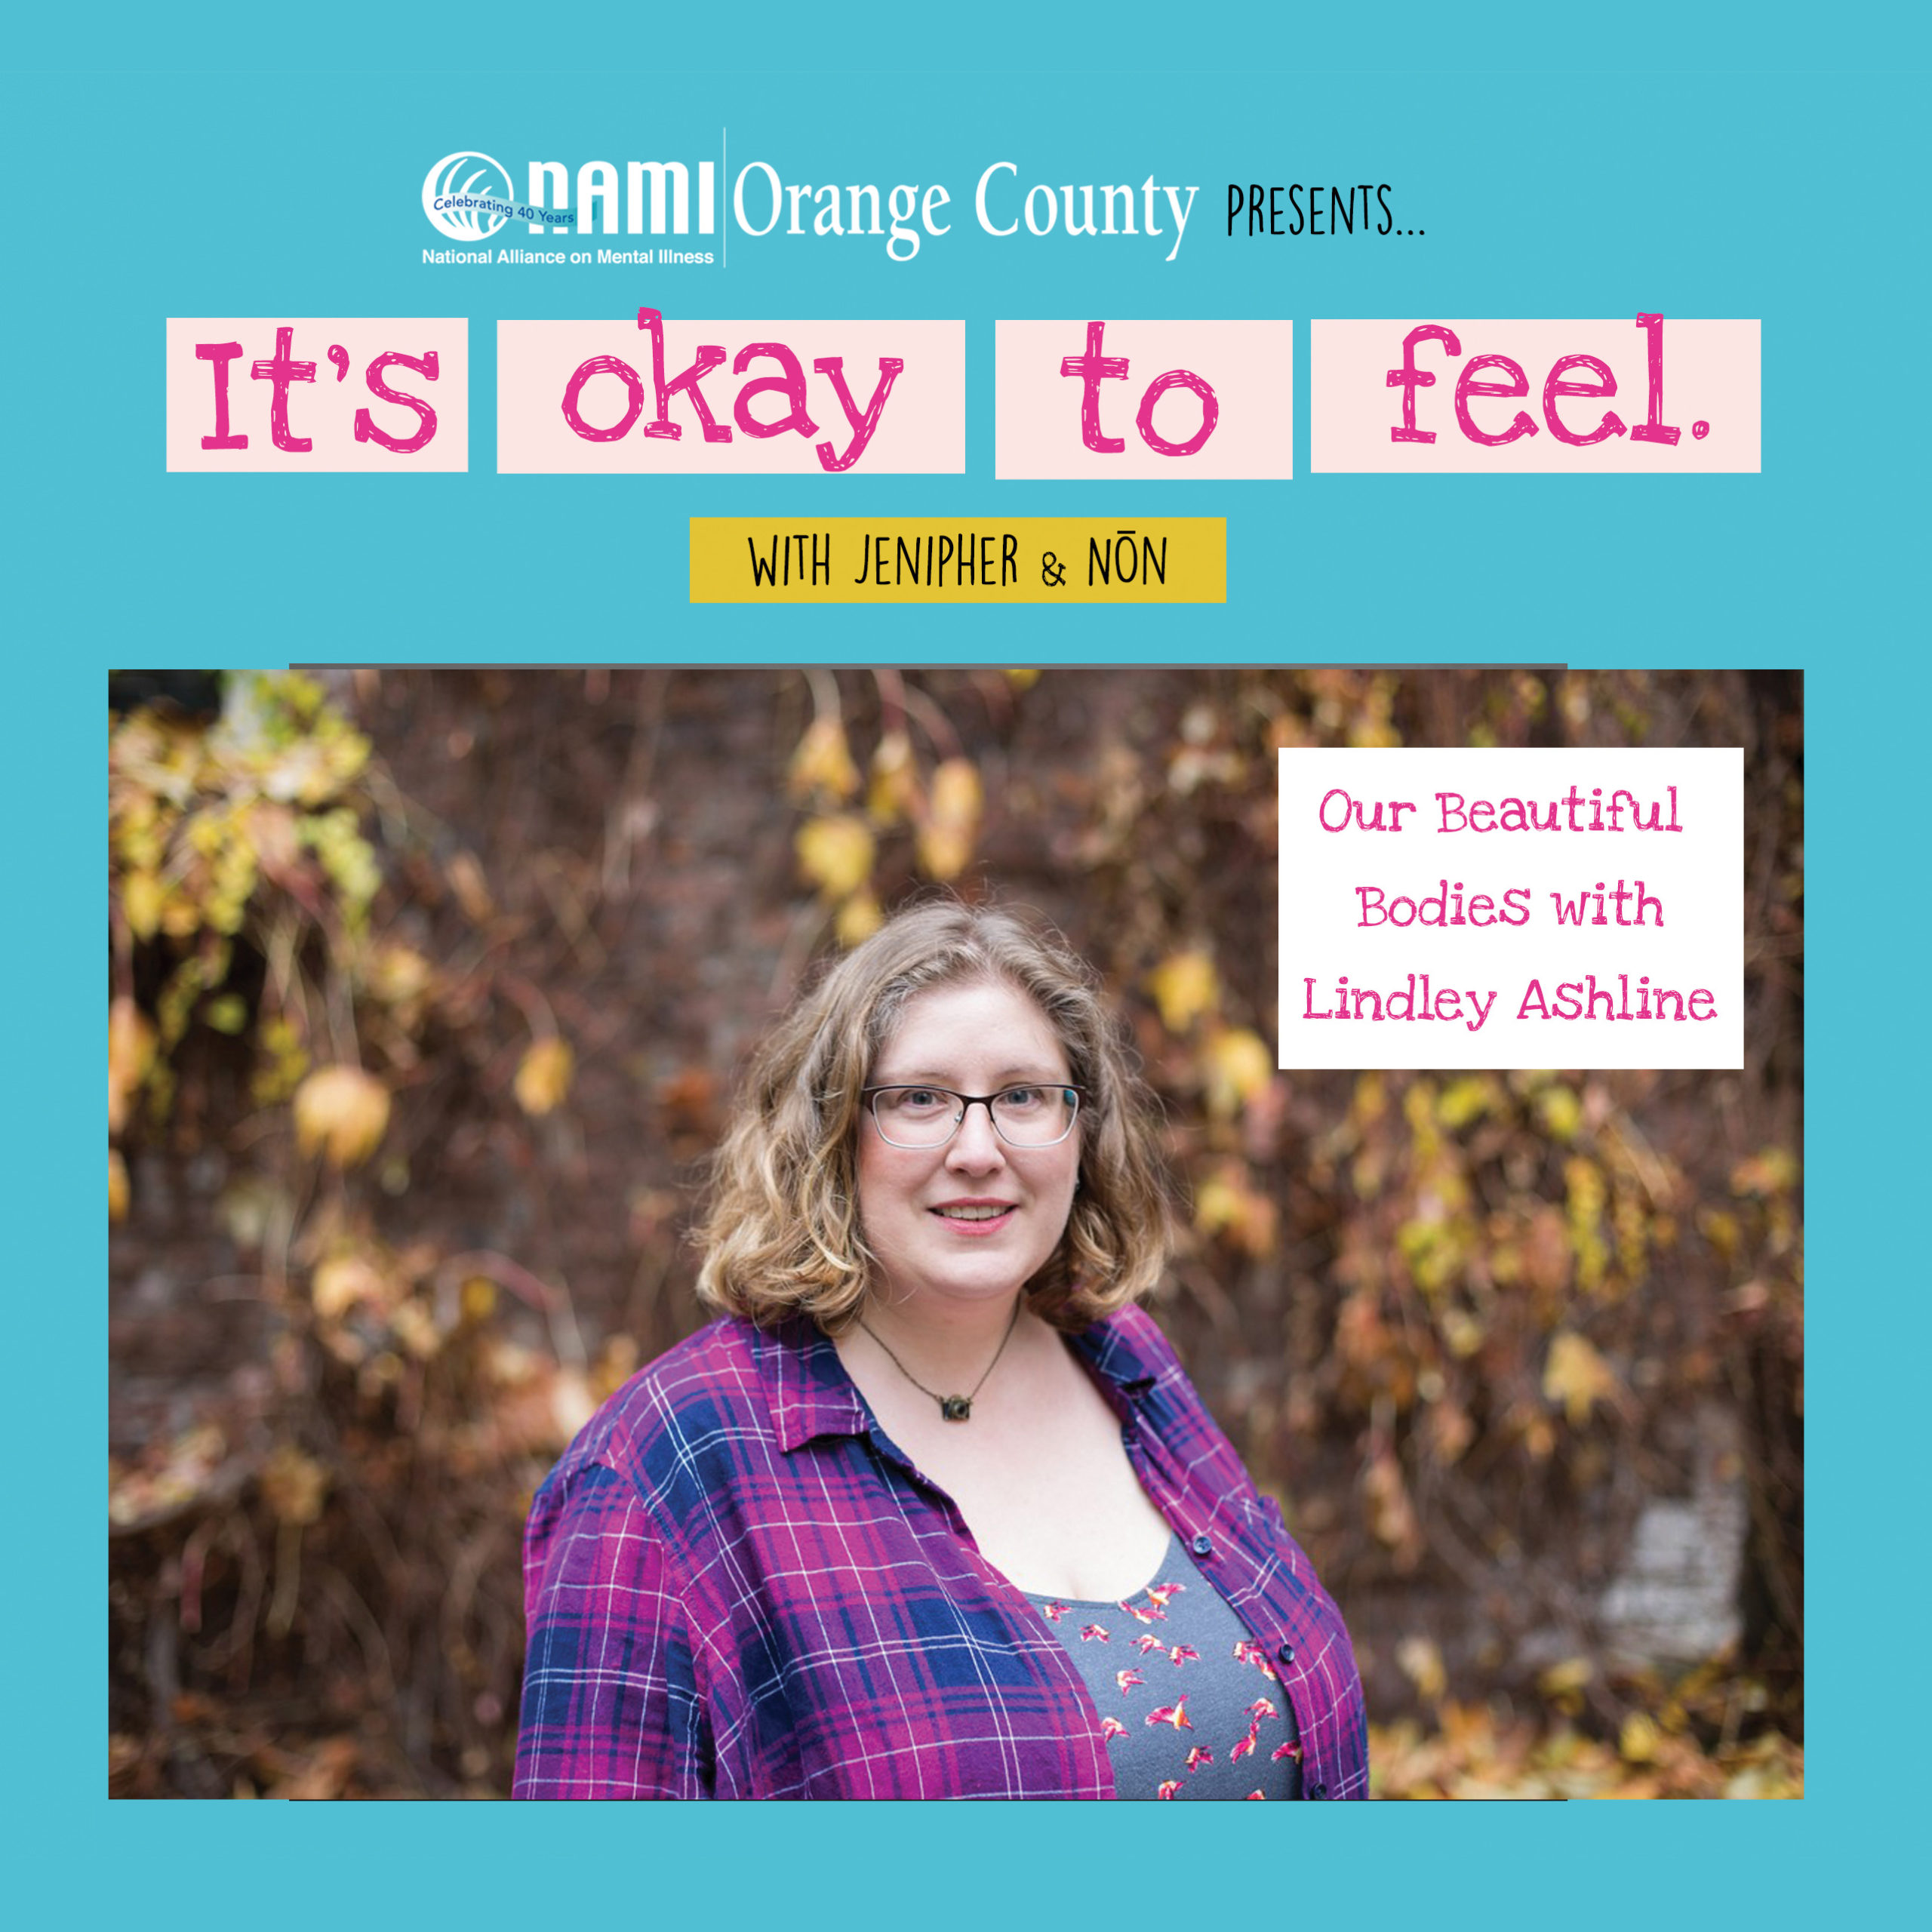 Lindley, a fat white woman, stands in a pink and blue plaid shirt in front of a wall covered in yellow and brown vines. Her photo is surrounded by a light blue border with text on top that reads, NAMI Orange County presents…It's Okay to Feel with Jenipher and Non. The podcast title is Our Beautiful Bodies with Lindley Ashline.